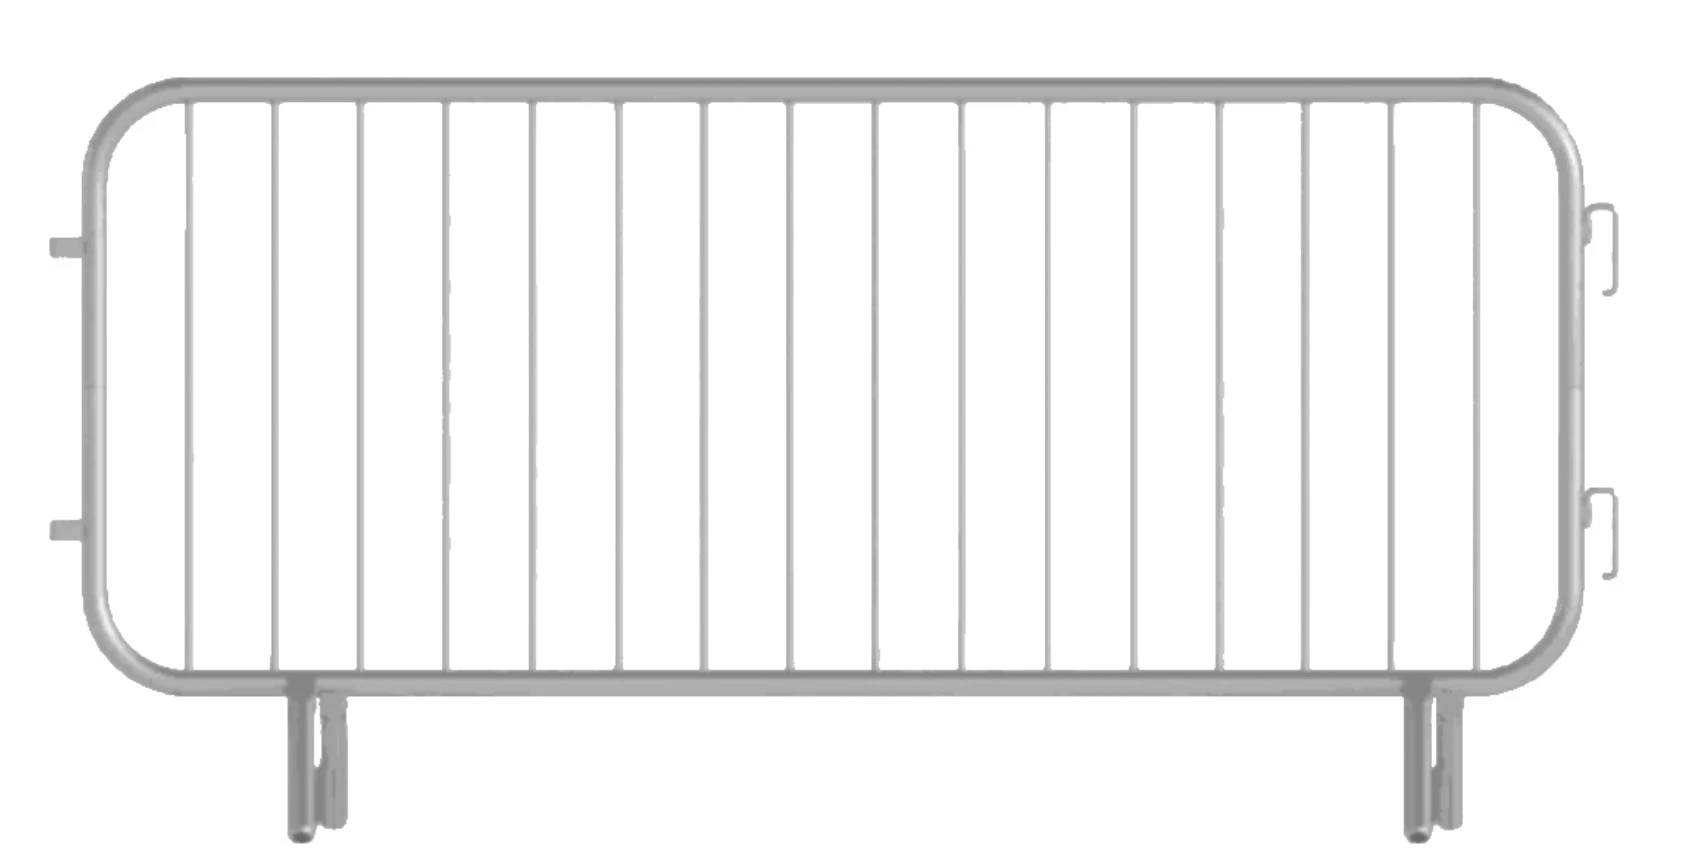 Temporary road safety traffic crowd control barrier fence crowd control galvanized metal barrier